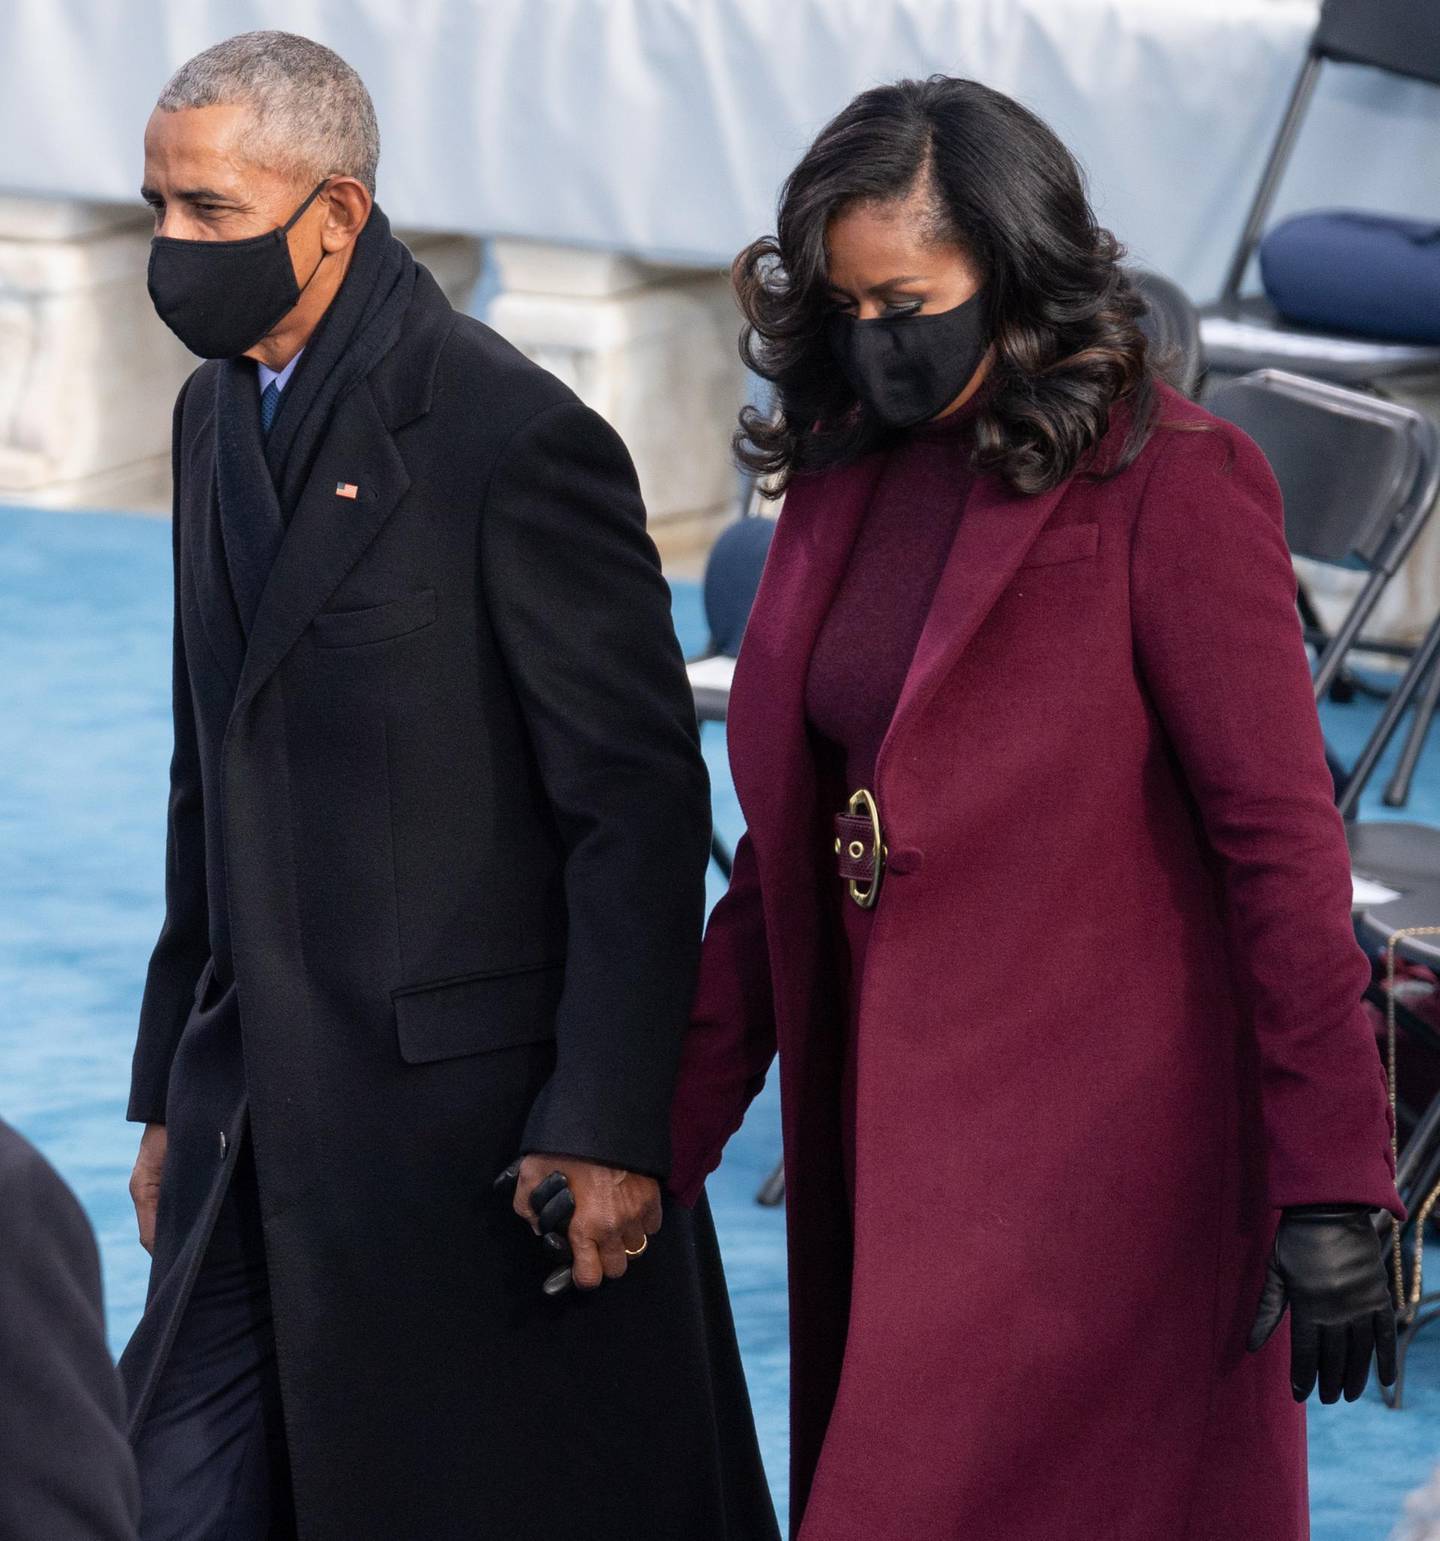 epa08953815 Former US President Barack Obama and Former US First Lady Michelle Obama arrive during the inauguration of Joe Biden as US President in Washington, DC, USA, 20 January 2021. Biden won the 03 November 2020 election to become the 46th President of the United States of America.  EPA/SAUL LOEB / POOL